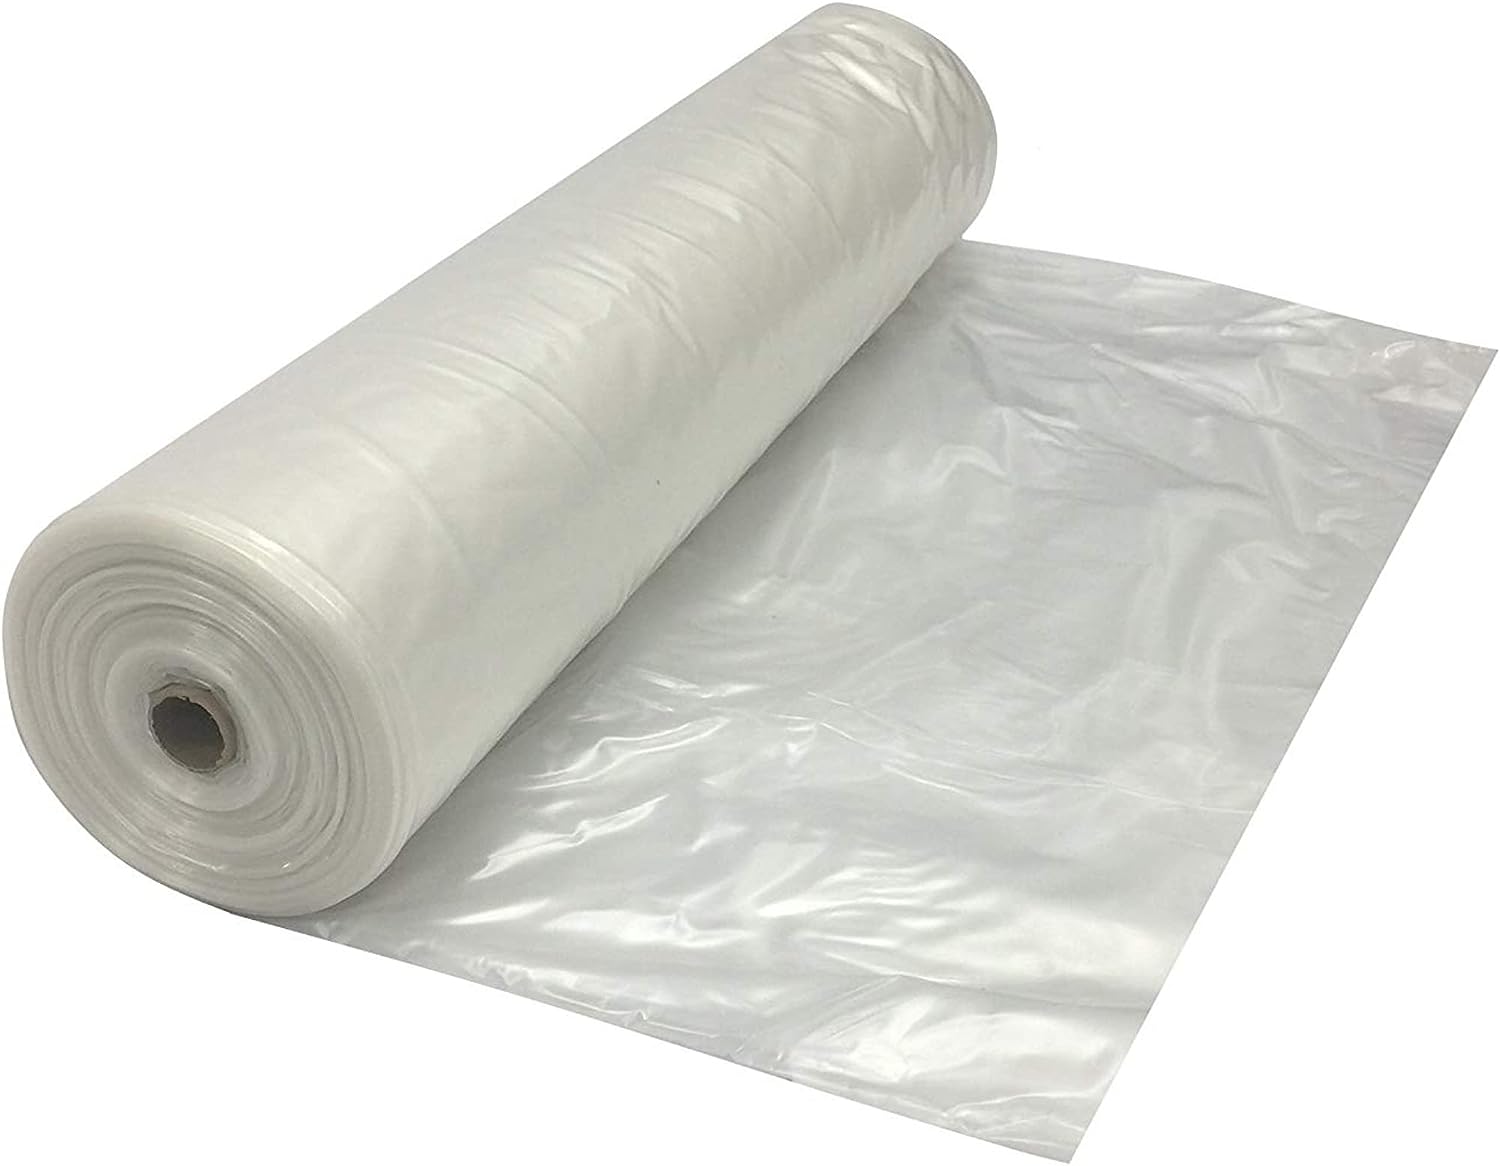 Poly Sheeting, 6 mil, 12' x 100' Clear